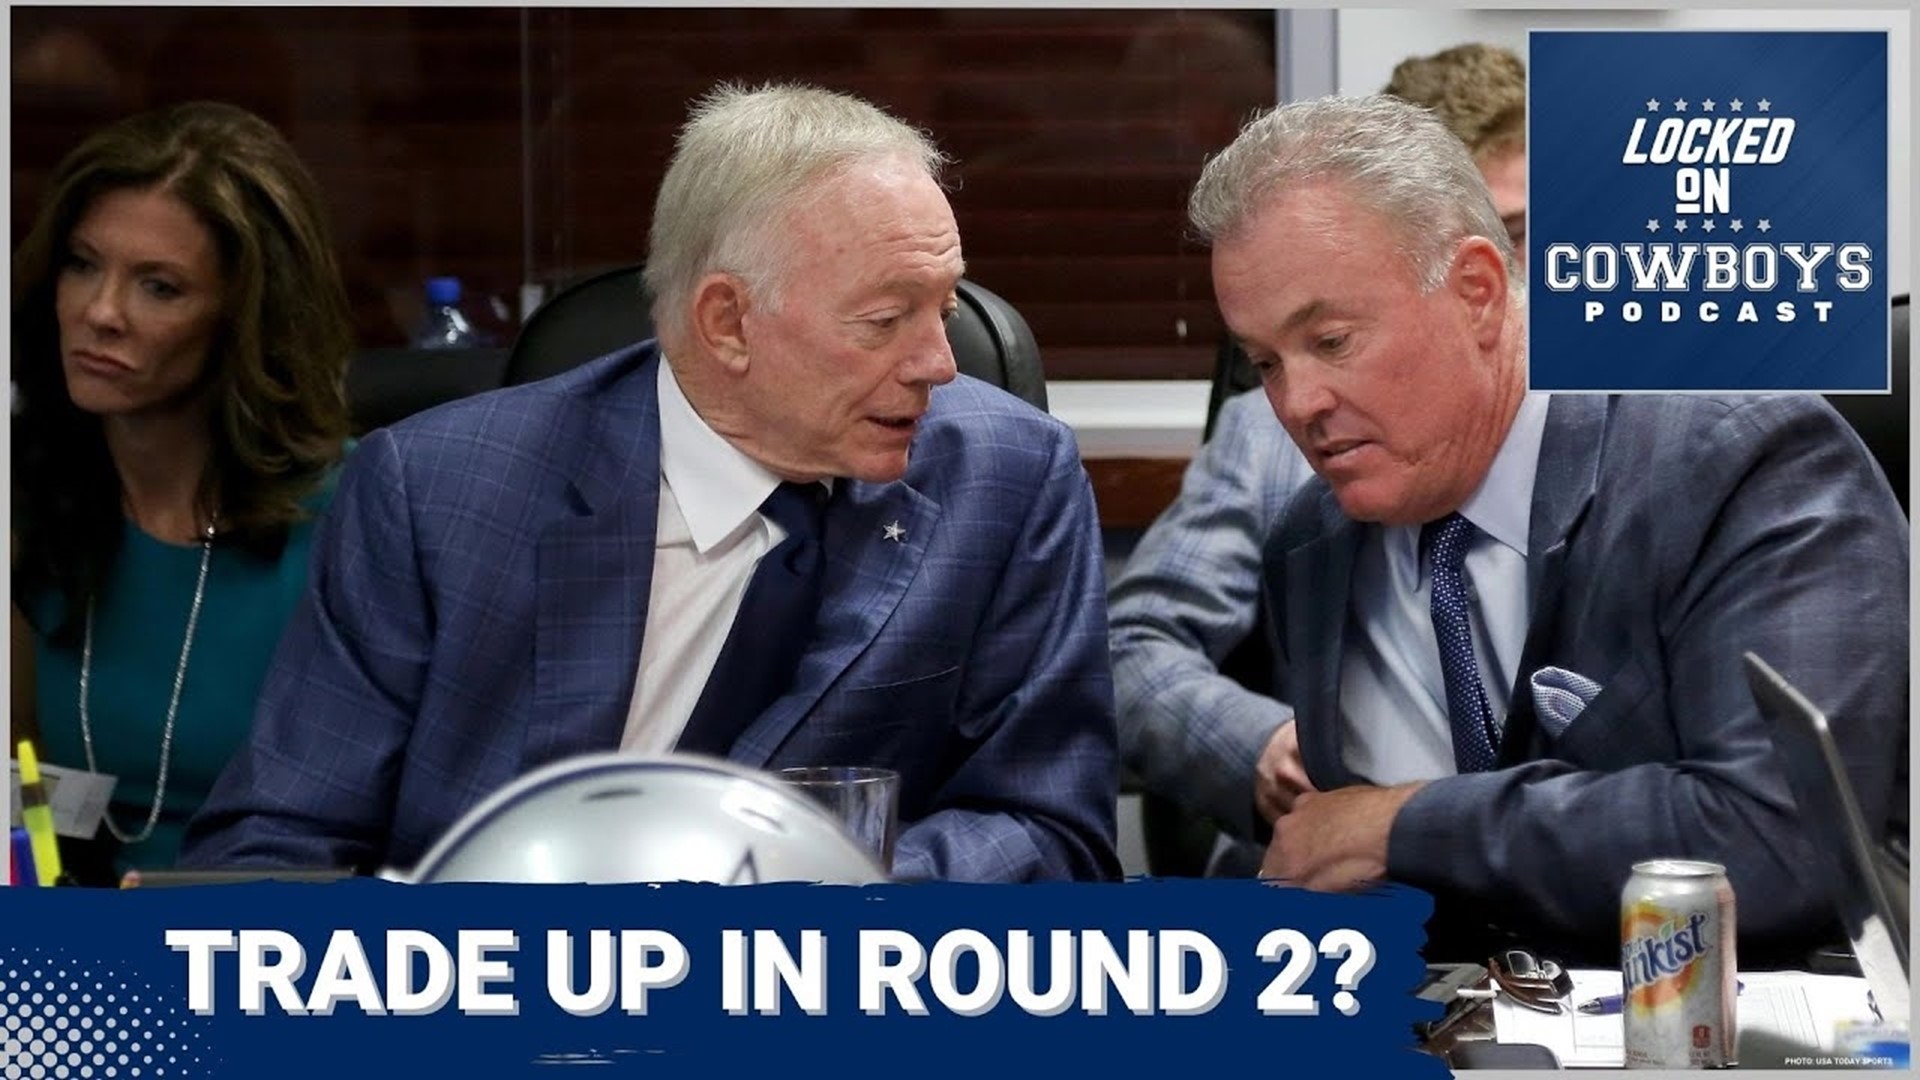 Marcus Mosher and Landon McCool run through a mock draft simulation for the Dallas Cowboys entering the 2023 NFL Draft.